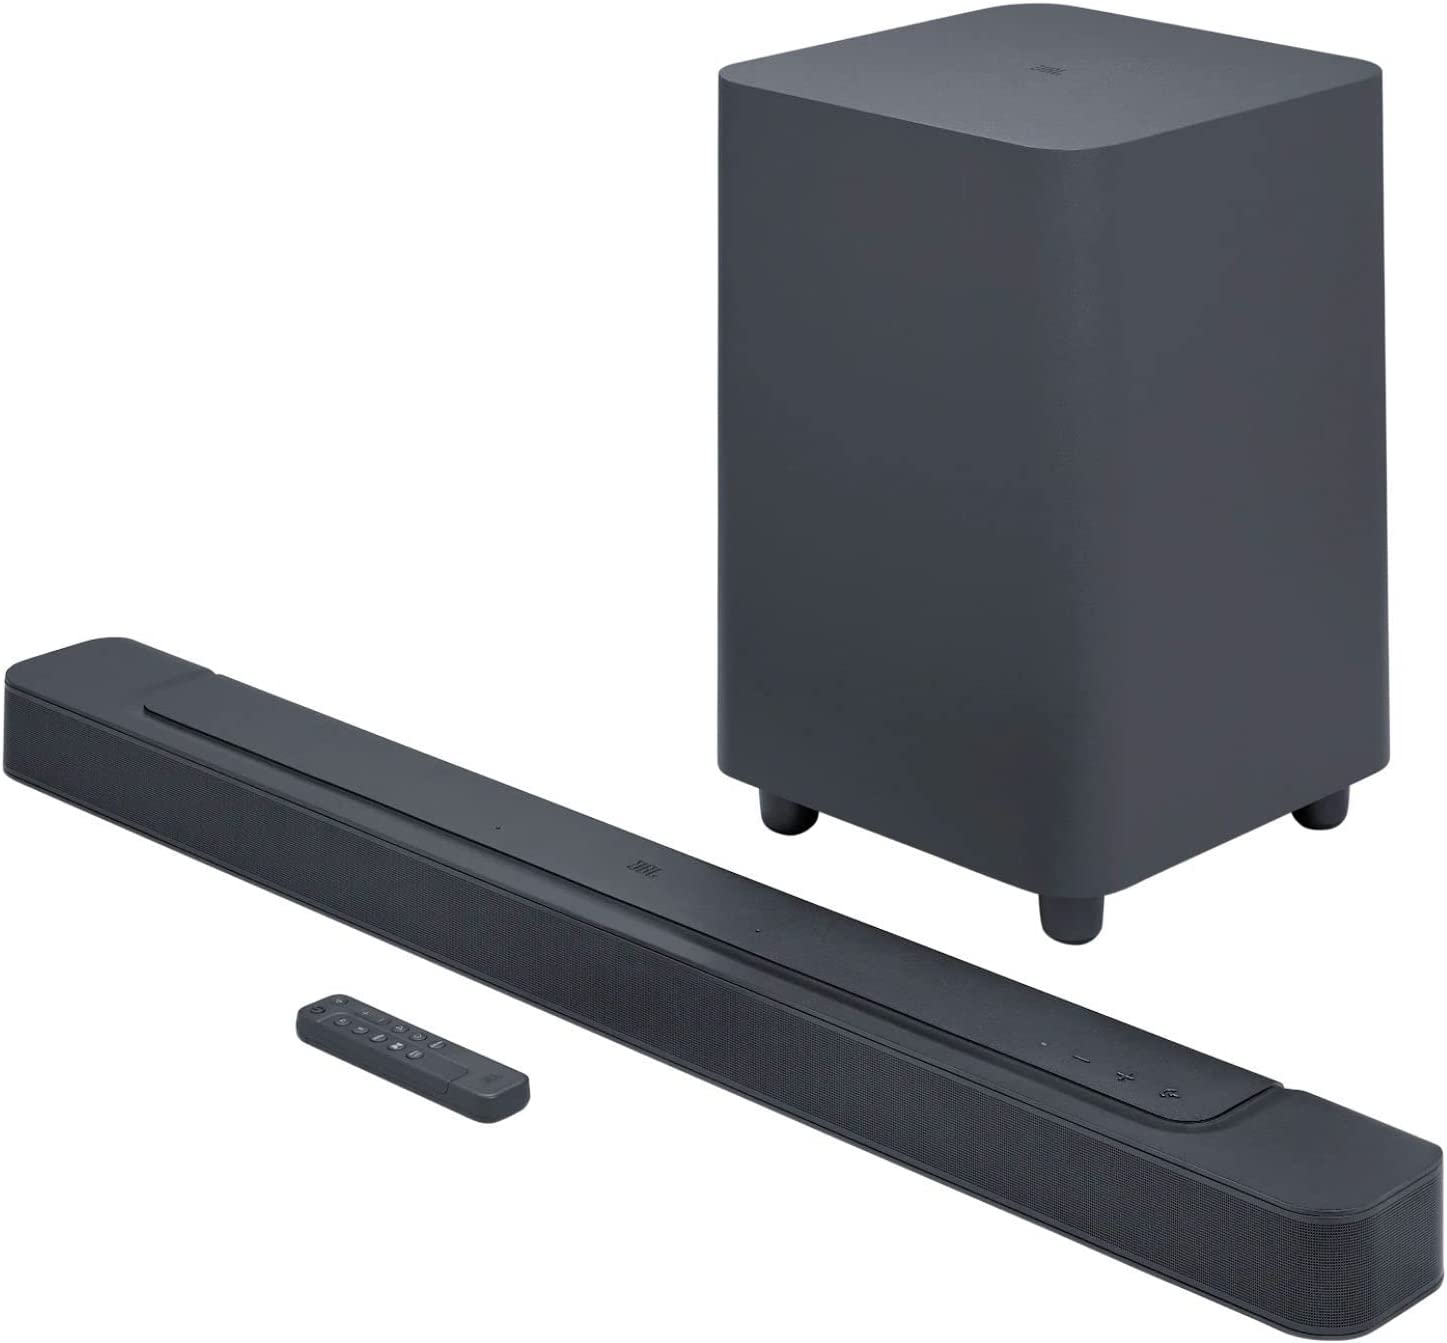 JBL BAR 500 5.1ch Soundbar with Multibeam and Dolby Atmos - Black (Certified Refurbished)